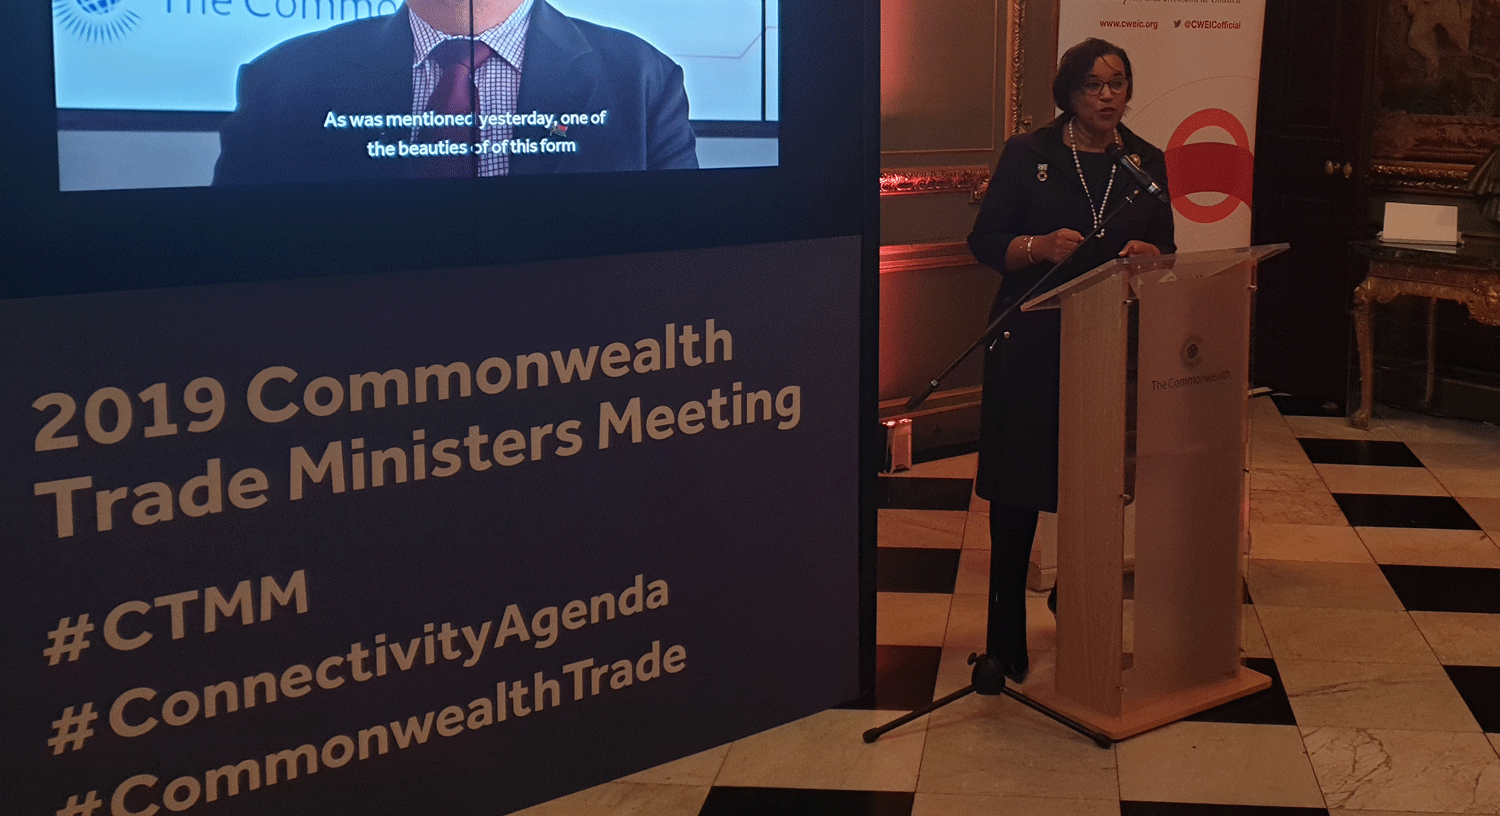 Commonwealth Trade Ministers’ Meeting